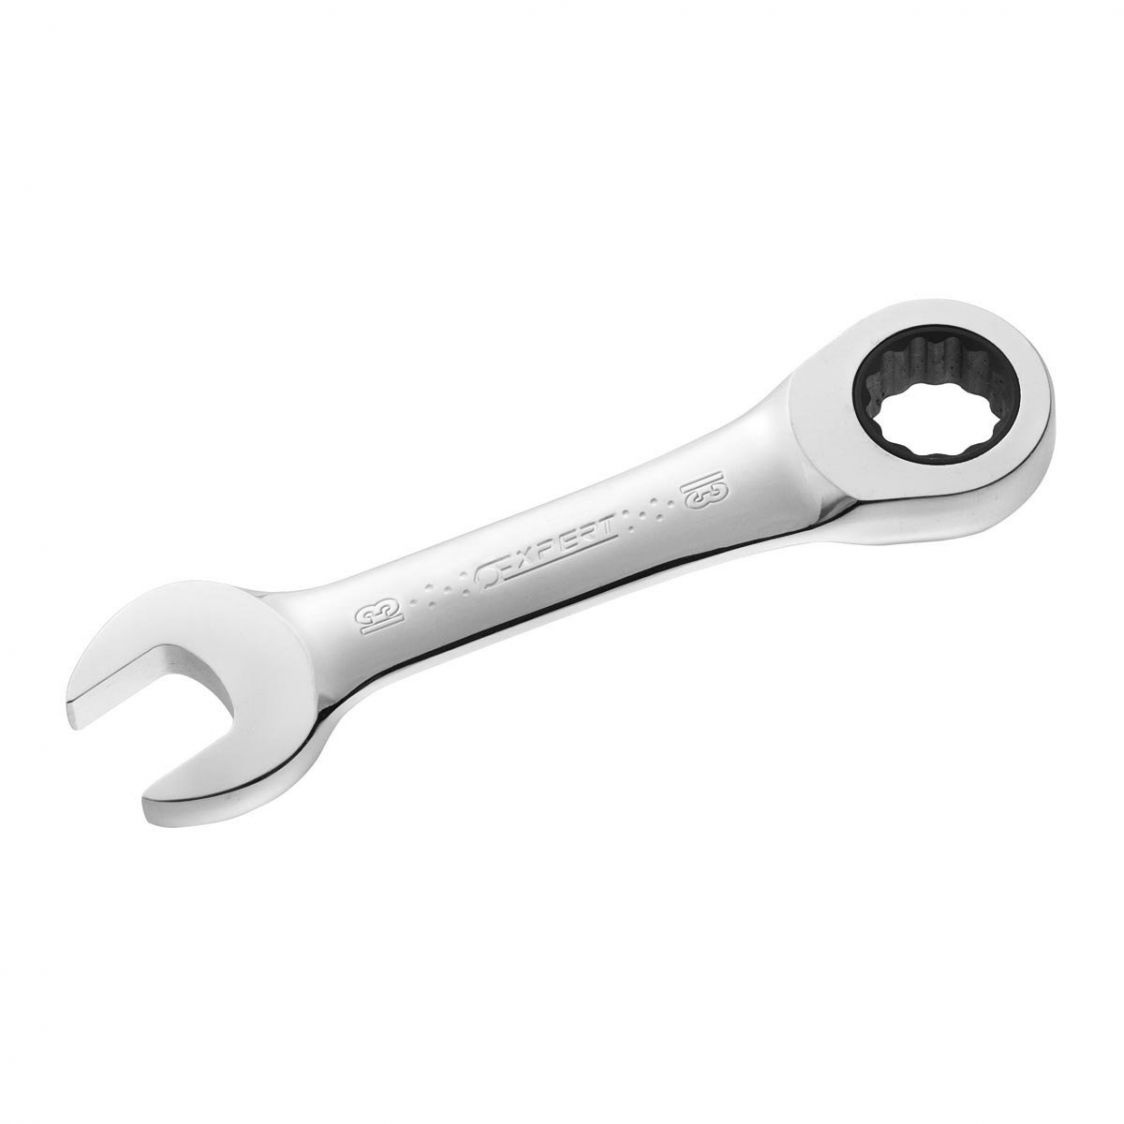 EXPERT by FACOM E110917 - 13mm Metric Stubby Ratchet Combination Spanner